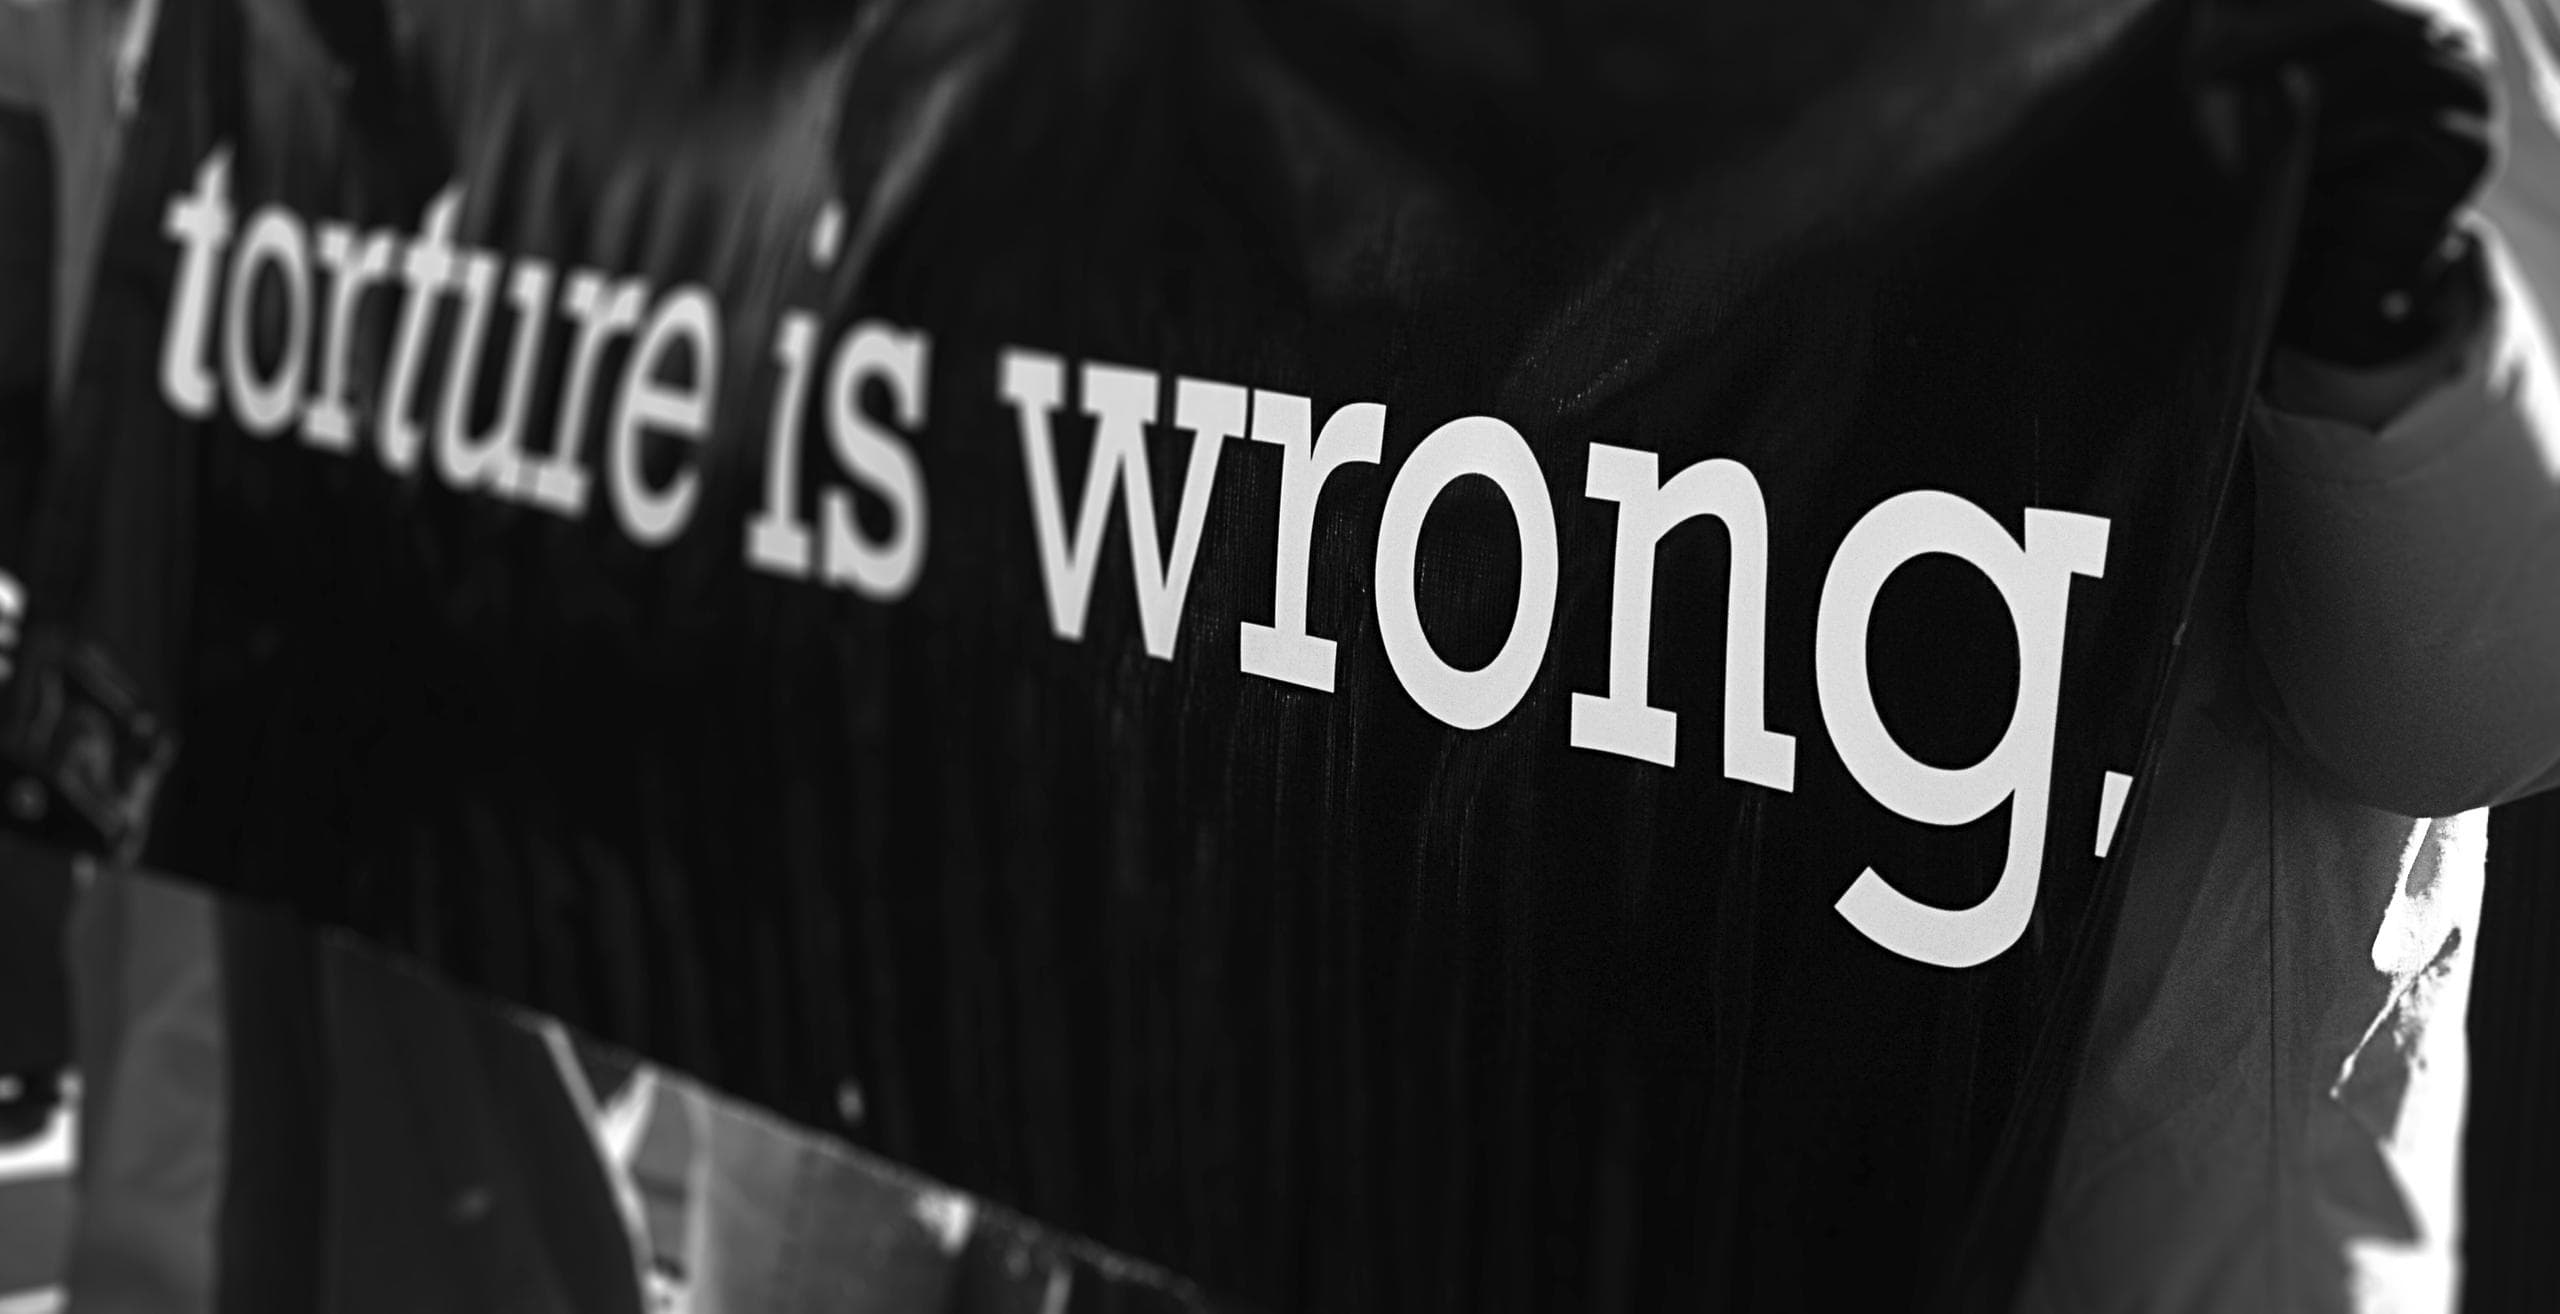 'torture is wrong' banner